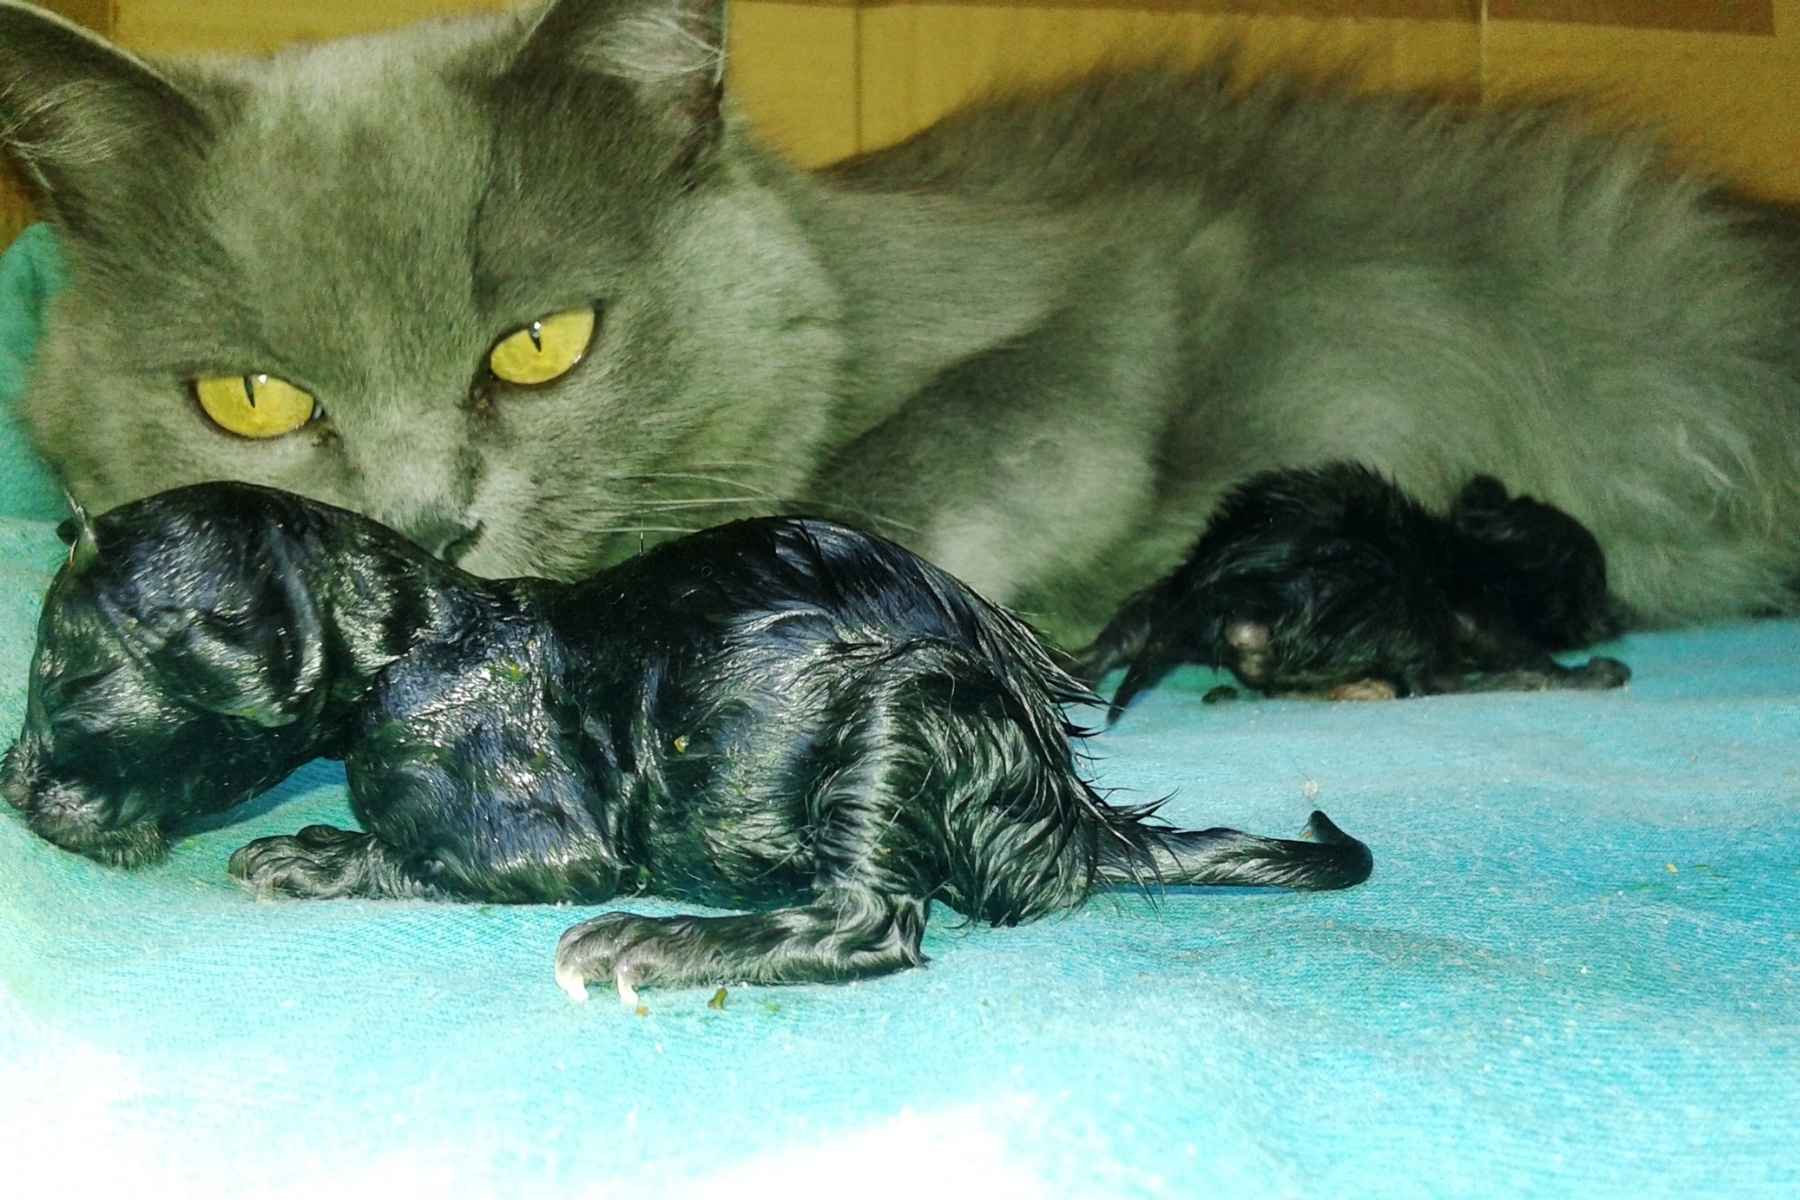 Mother cat has just given birth to newborn kittens